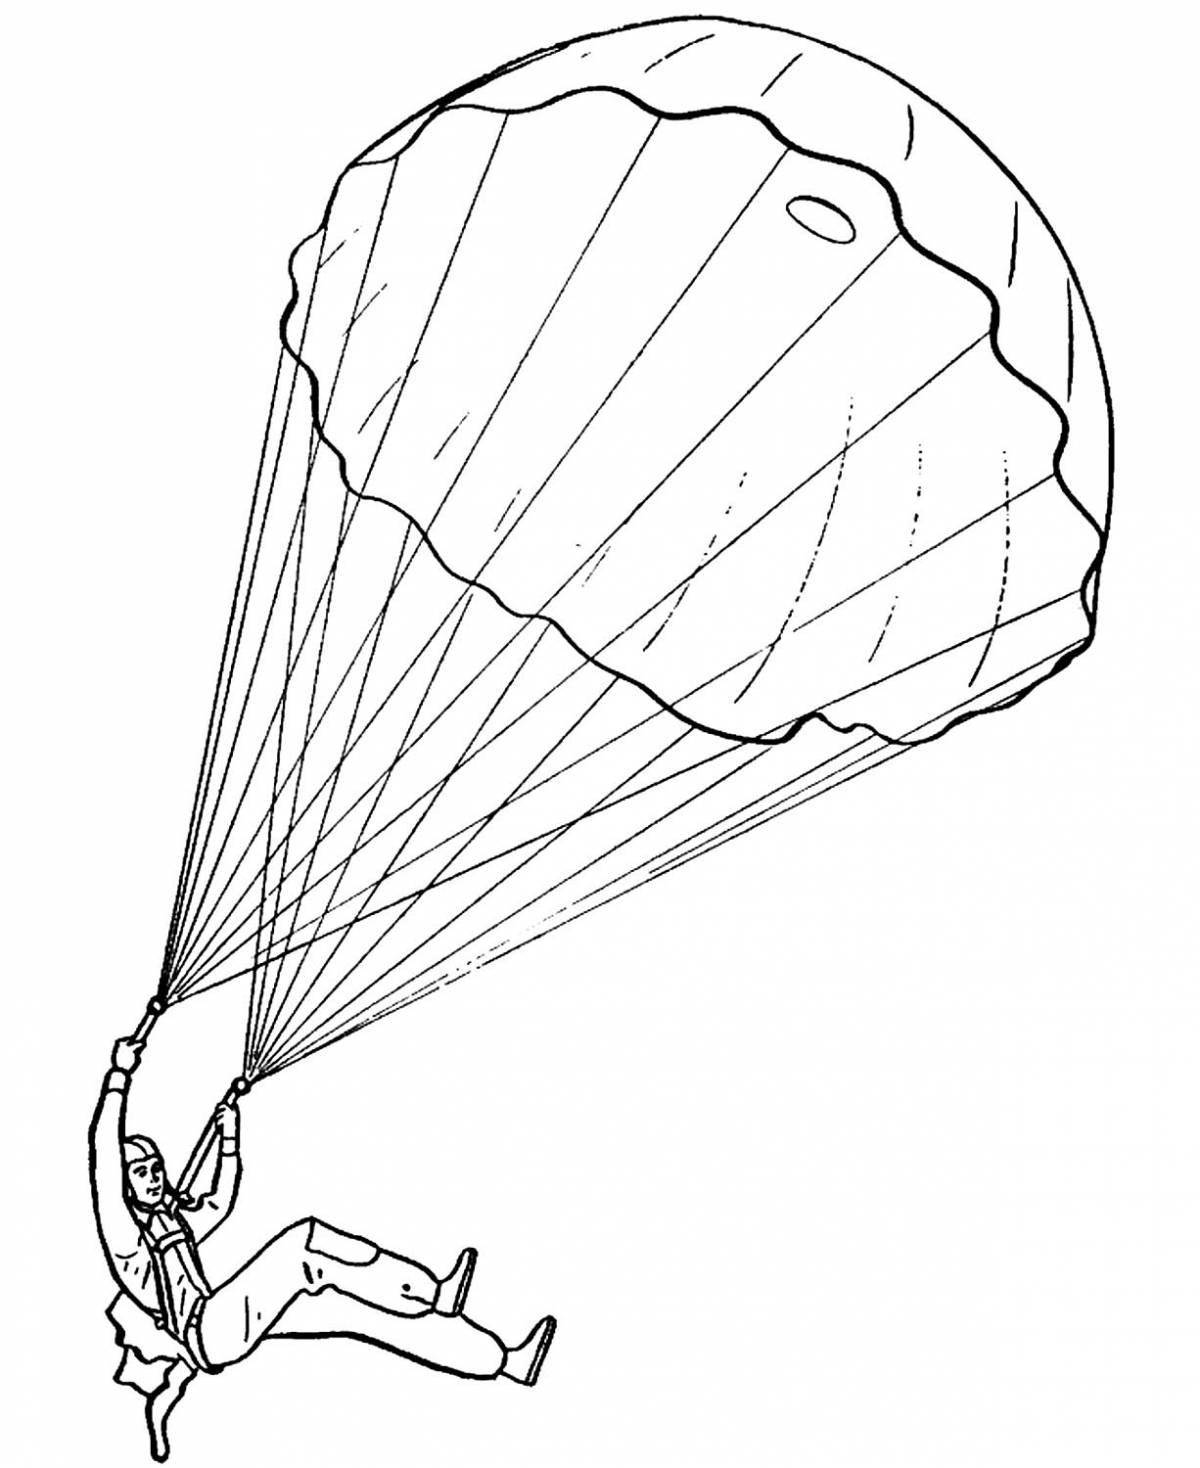 Exciting skydiver coloring book